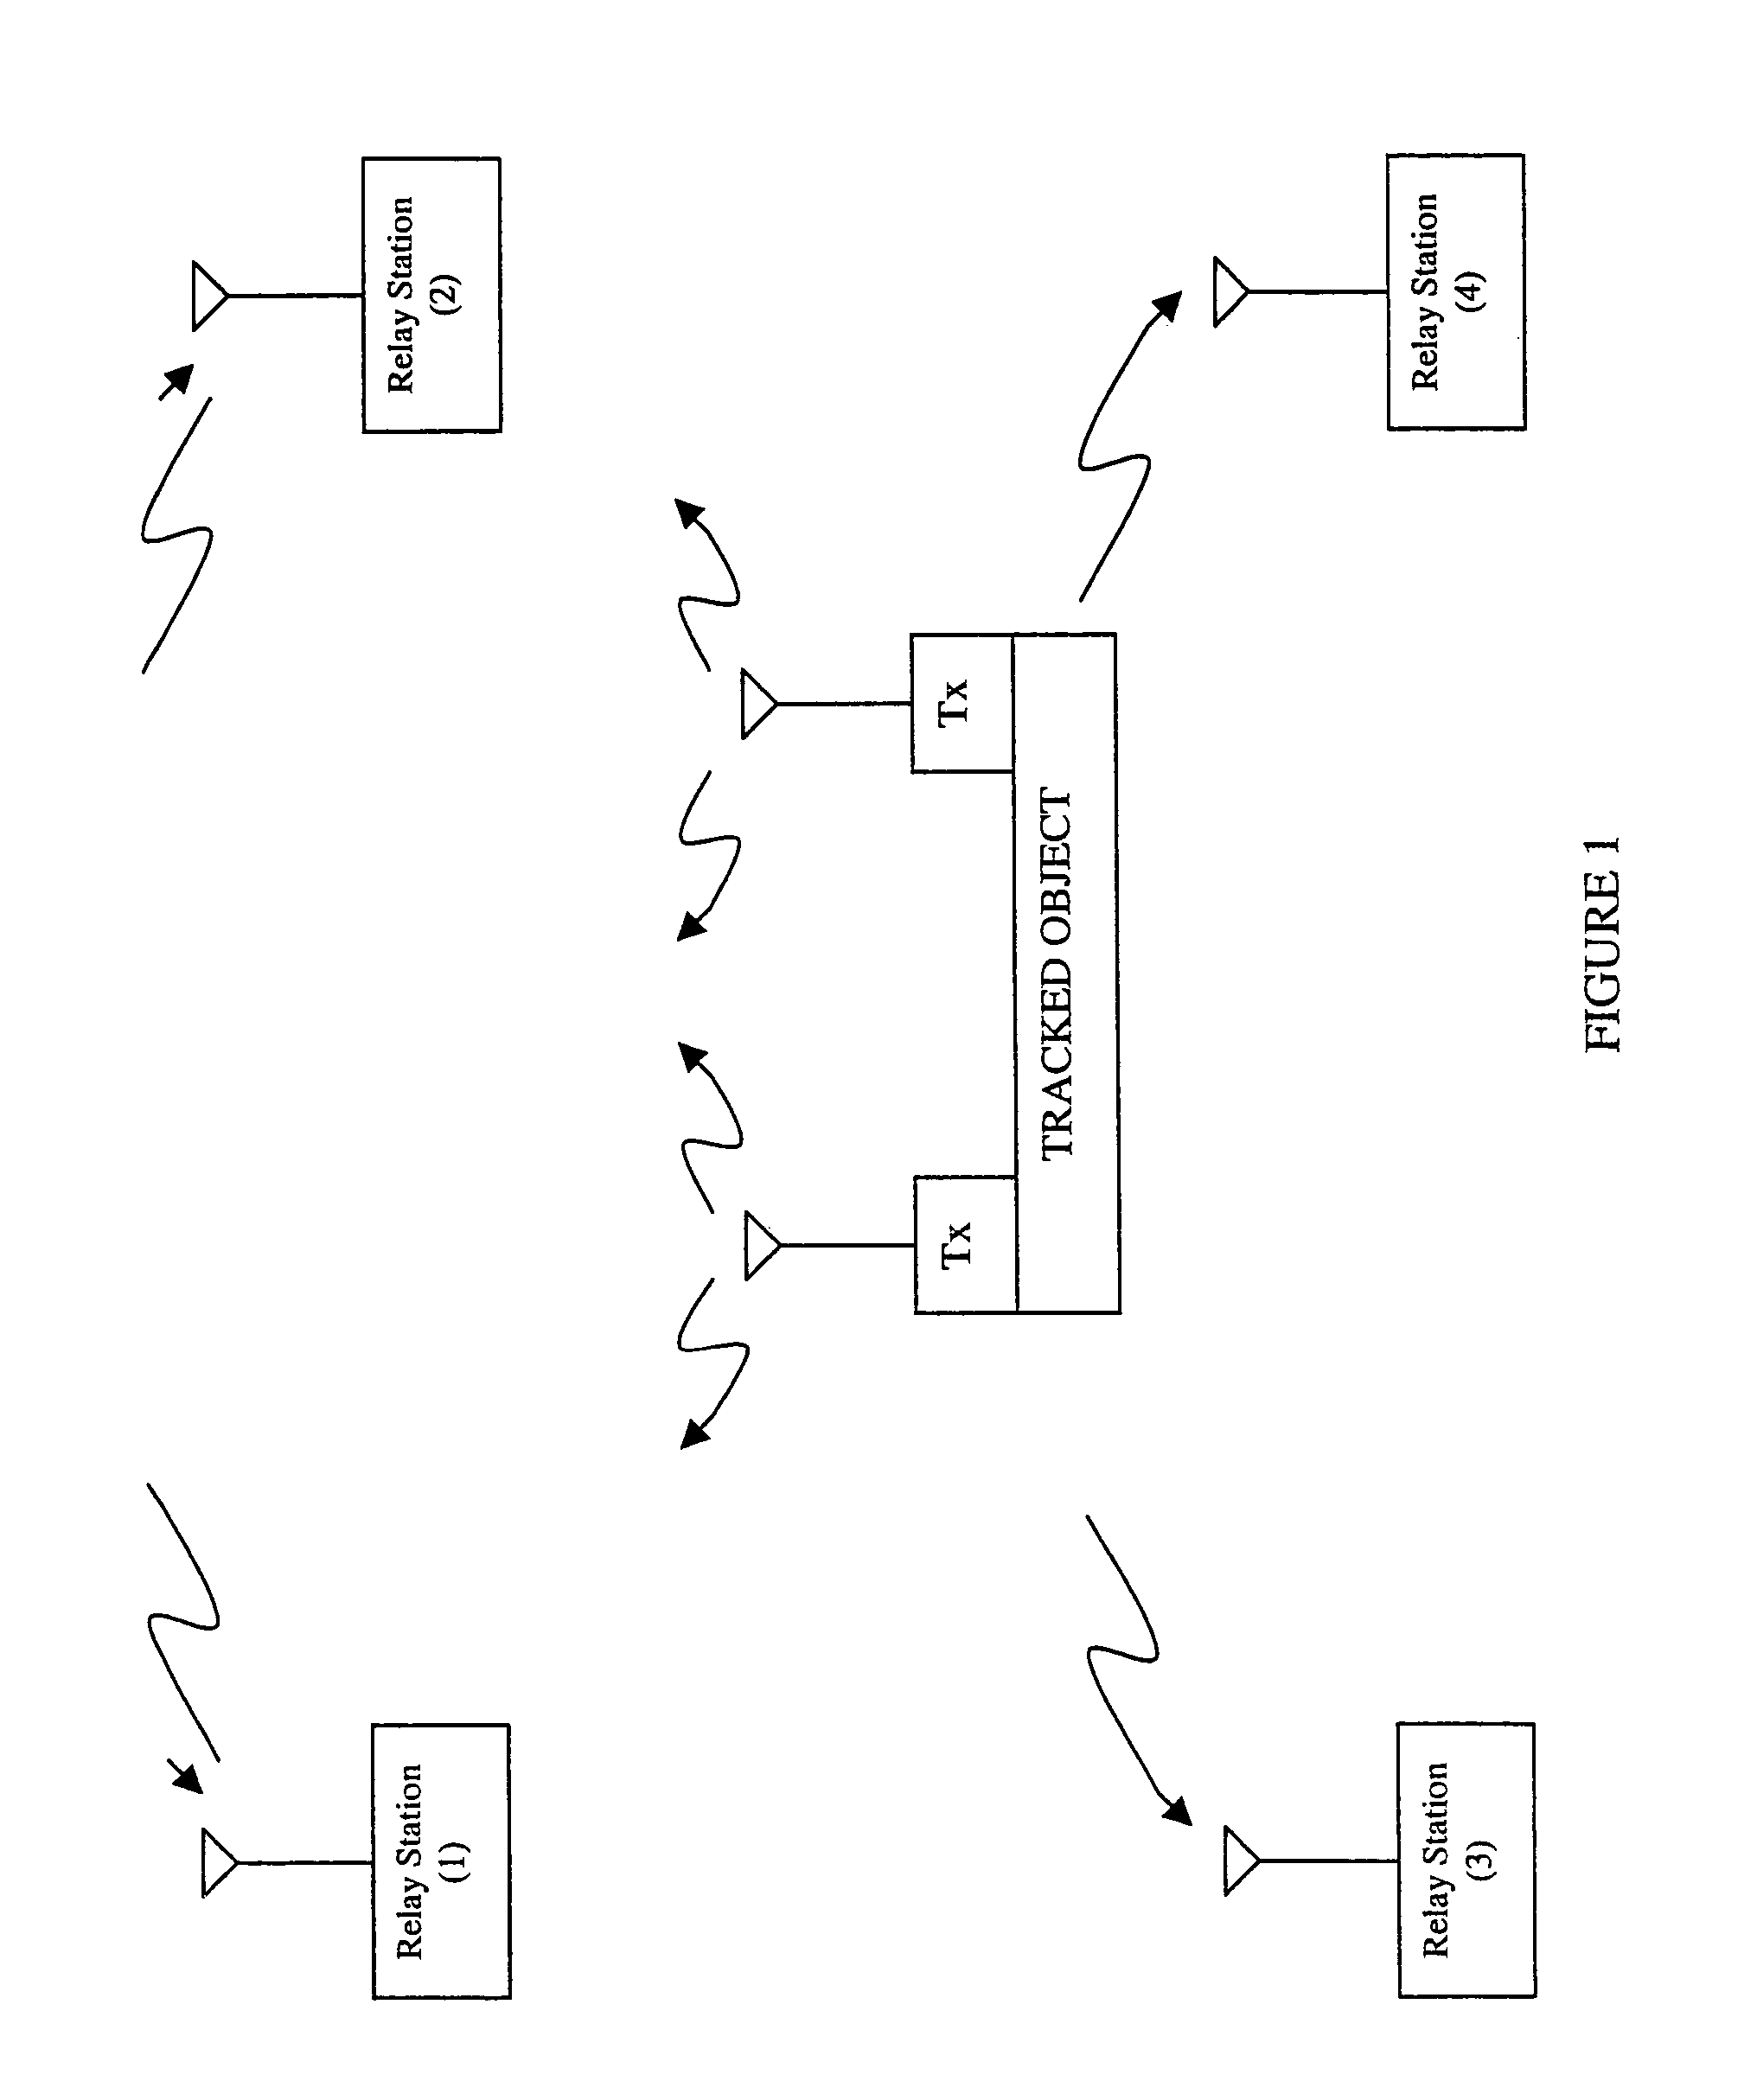 Radio signal transmitter with multiple antennas for improved position detection